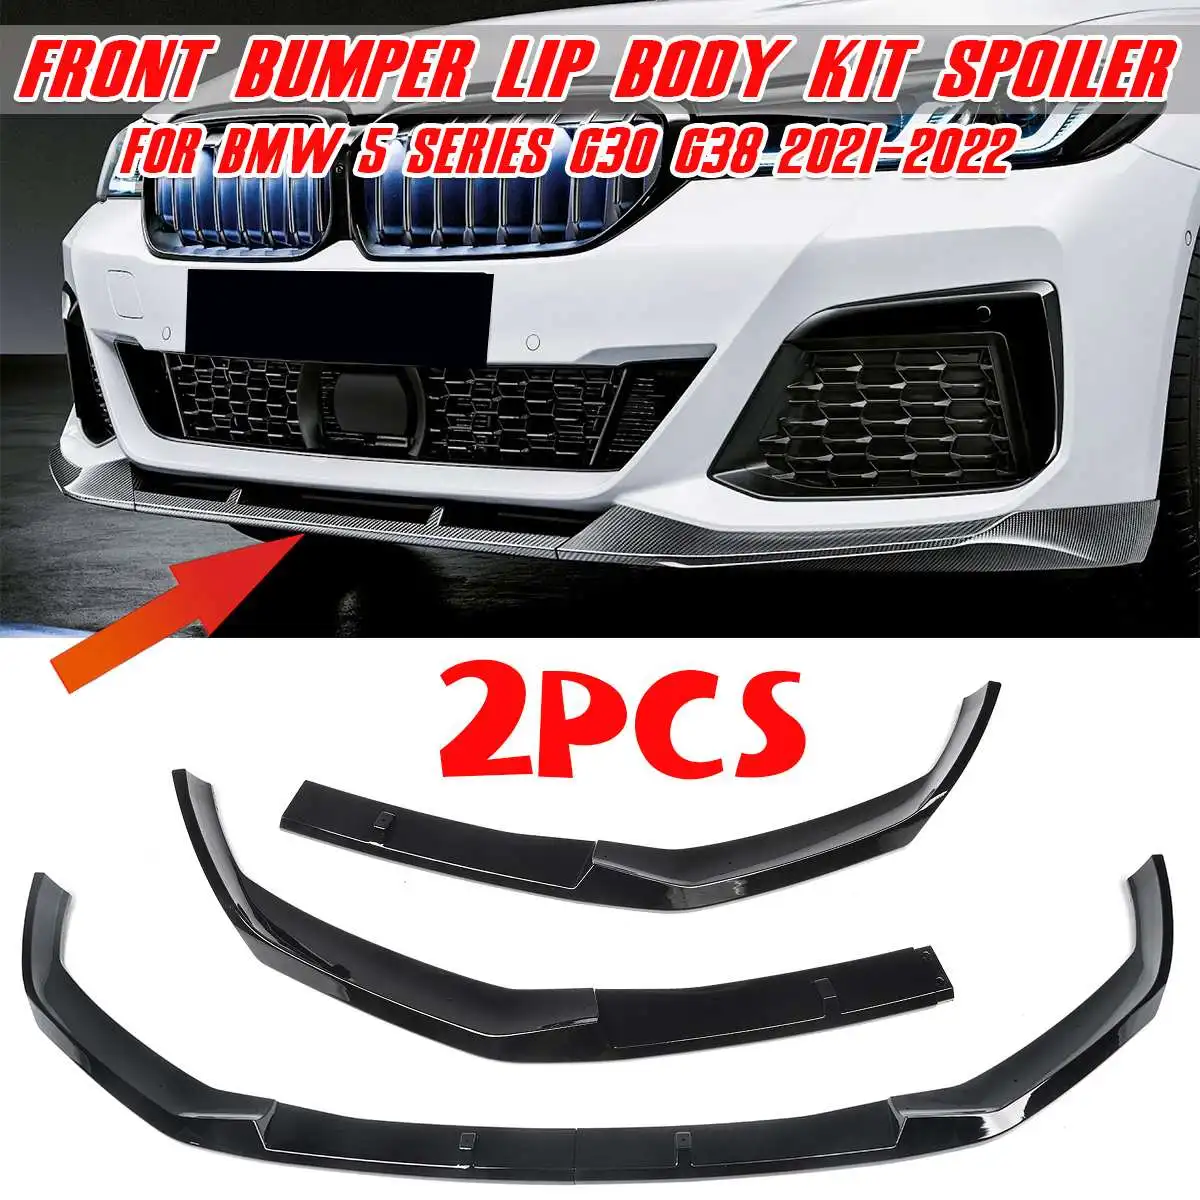 

High Quality 2xCar Front Bumper Lip Body Kit Splitter Spoiler Protector Cover Diffuser Guard For BMW 5 Series G30 G38 2021-2022